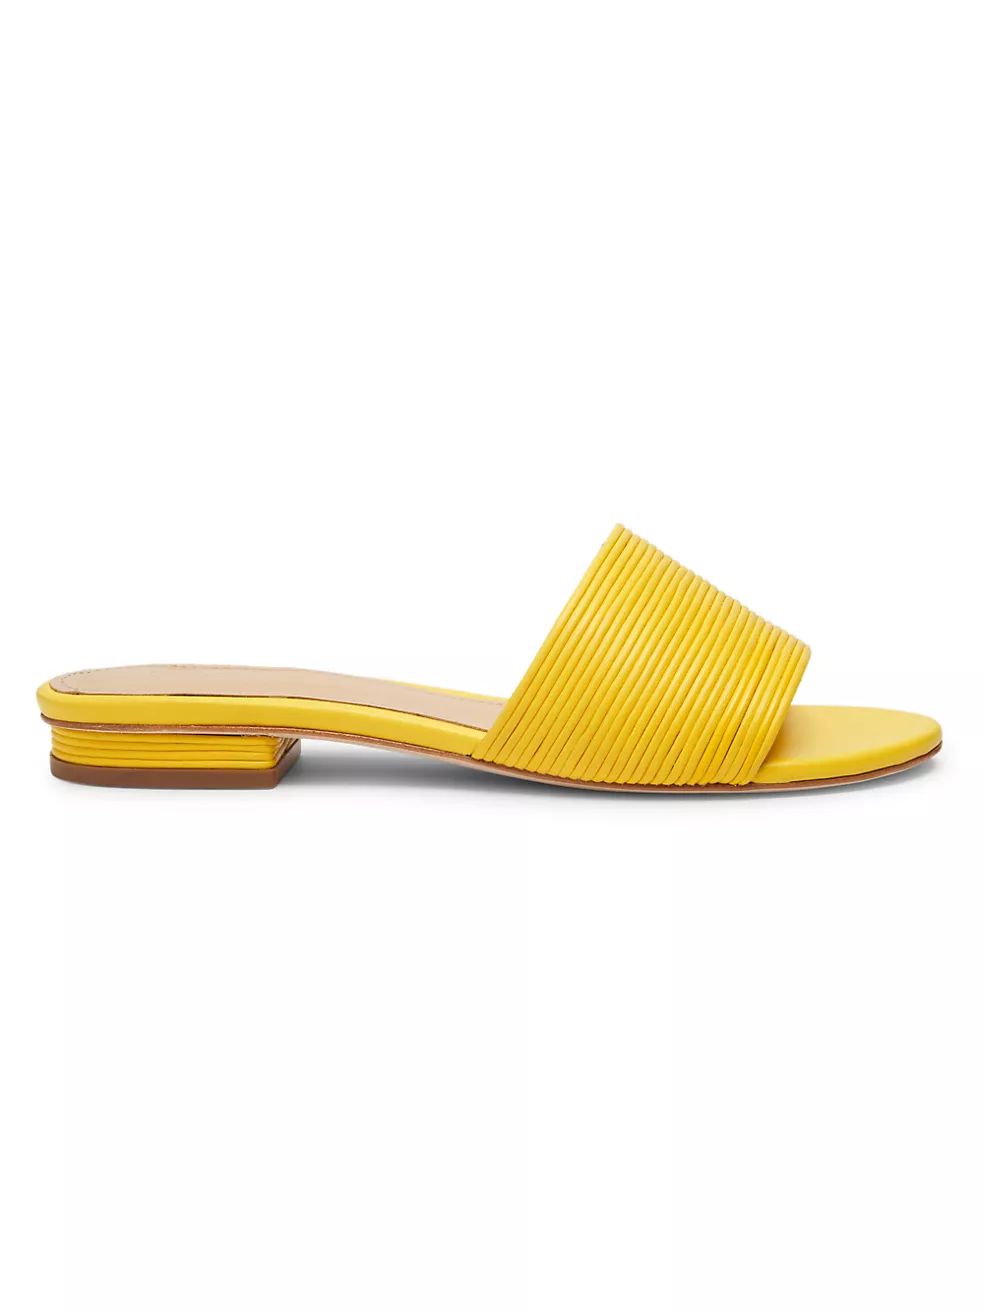 Leather Flat Sandals | Saks Fifth Avenue